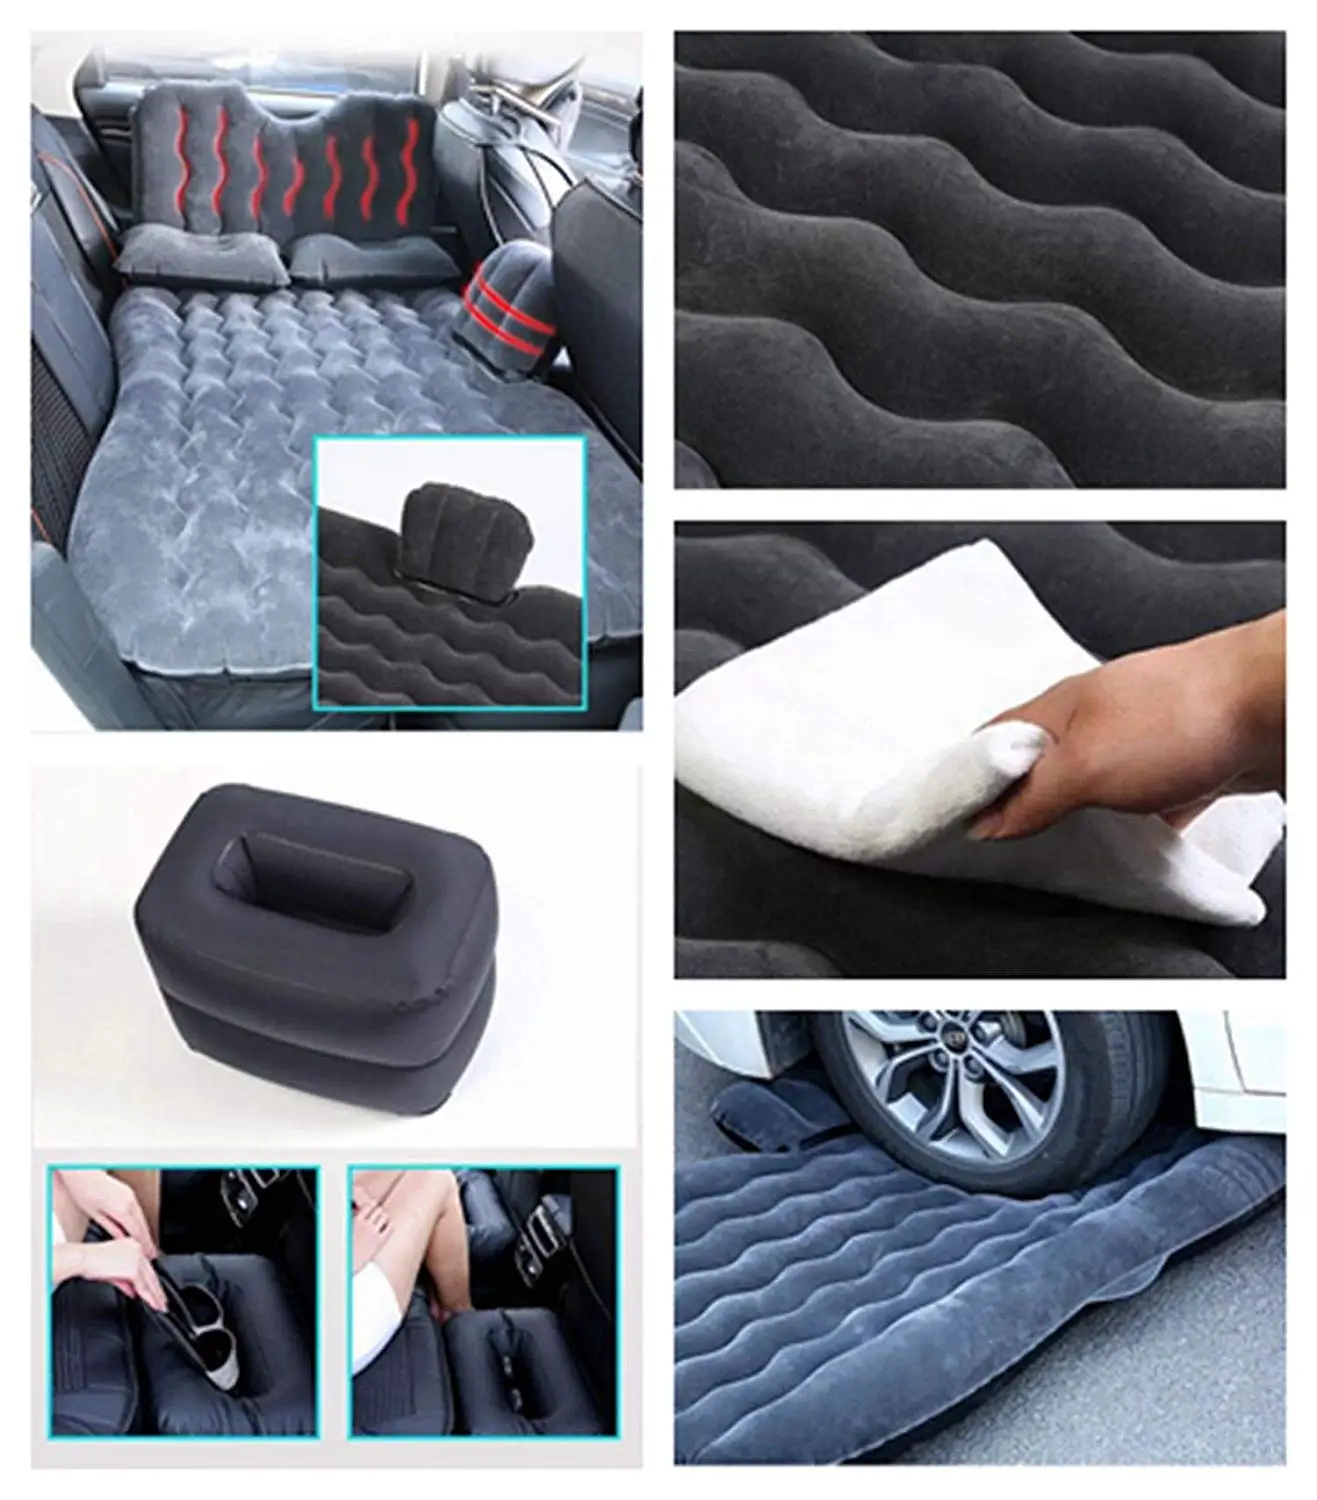 Sleeping Blow-Up Bed Pad fits SUV Minivan Camping Vacation Truck JMEOWIO Car Inflatable Air Mattress Back Seat Pump Portable Travel Compact Twin Size 